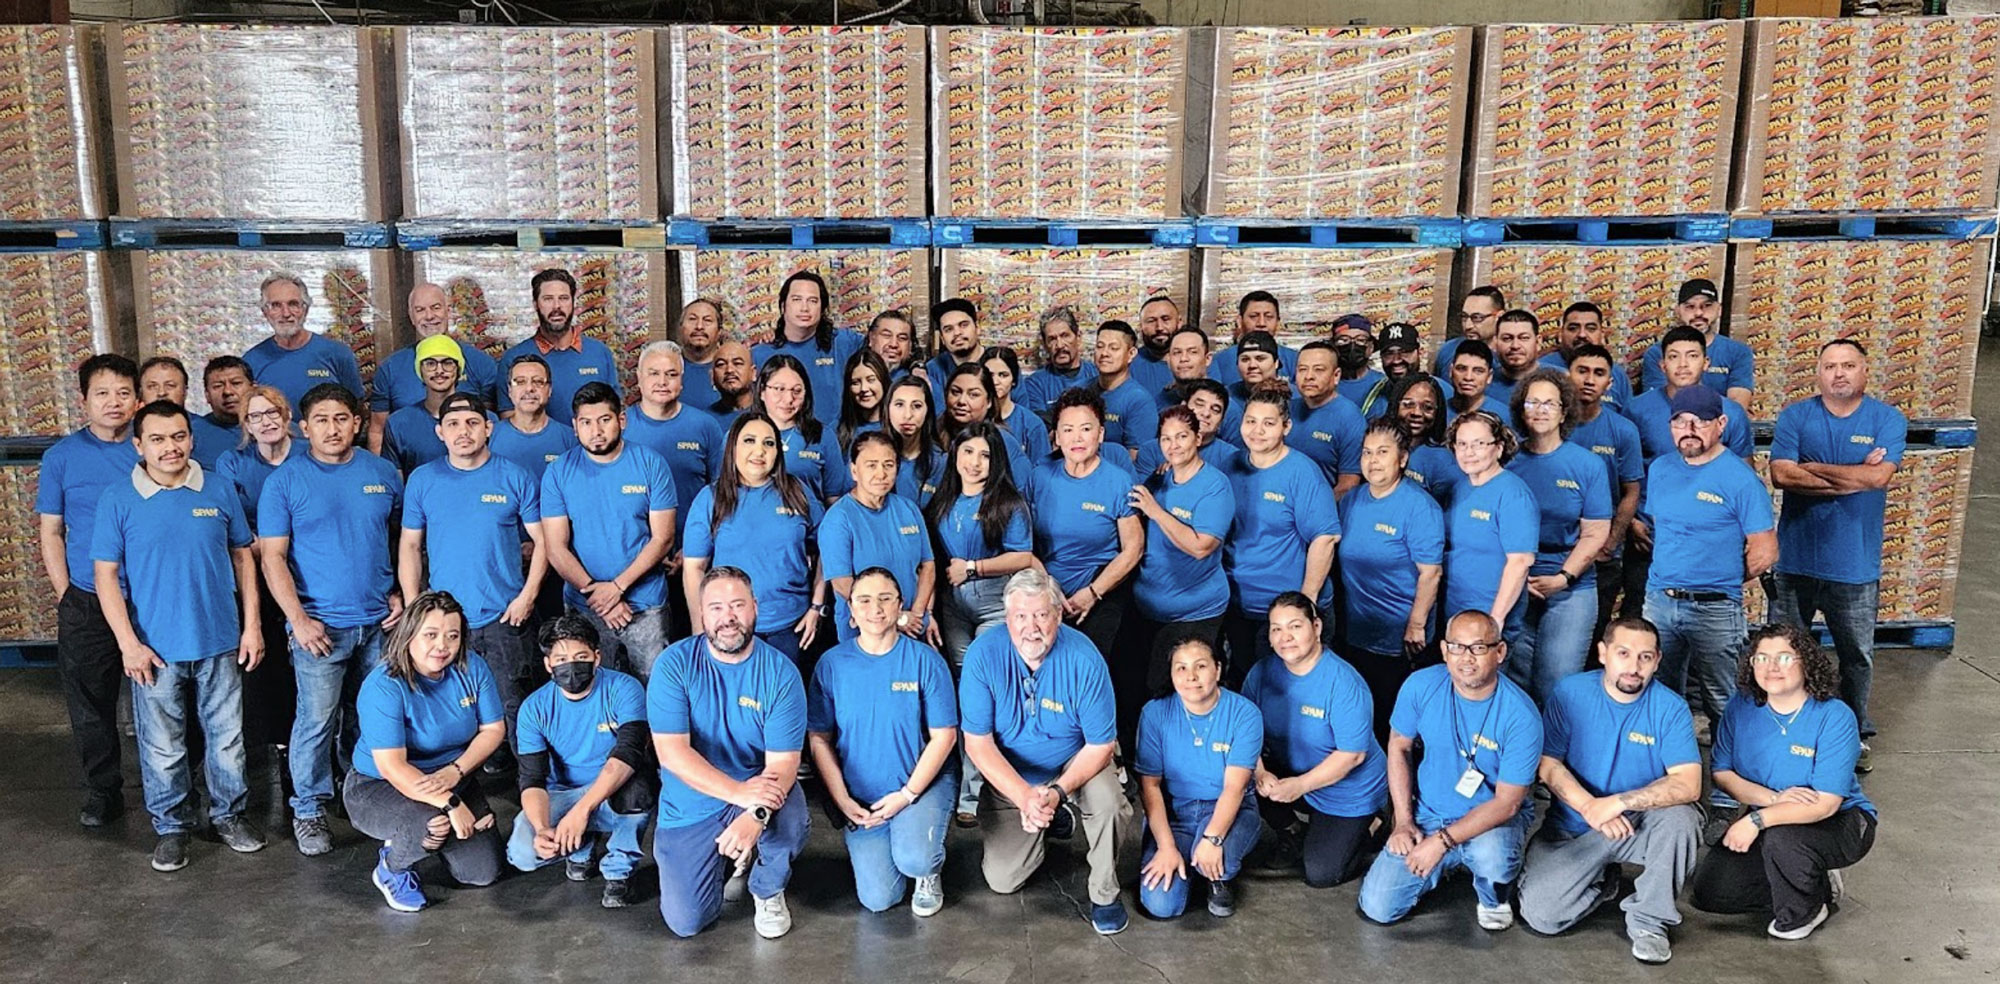 Hormel and PRISM Logistics Raise Love for Maui – with T-Shirt Fundraiser and 260,000 Cans of SPAM!